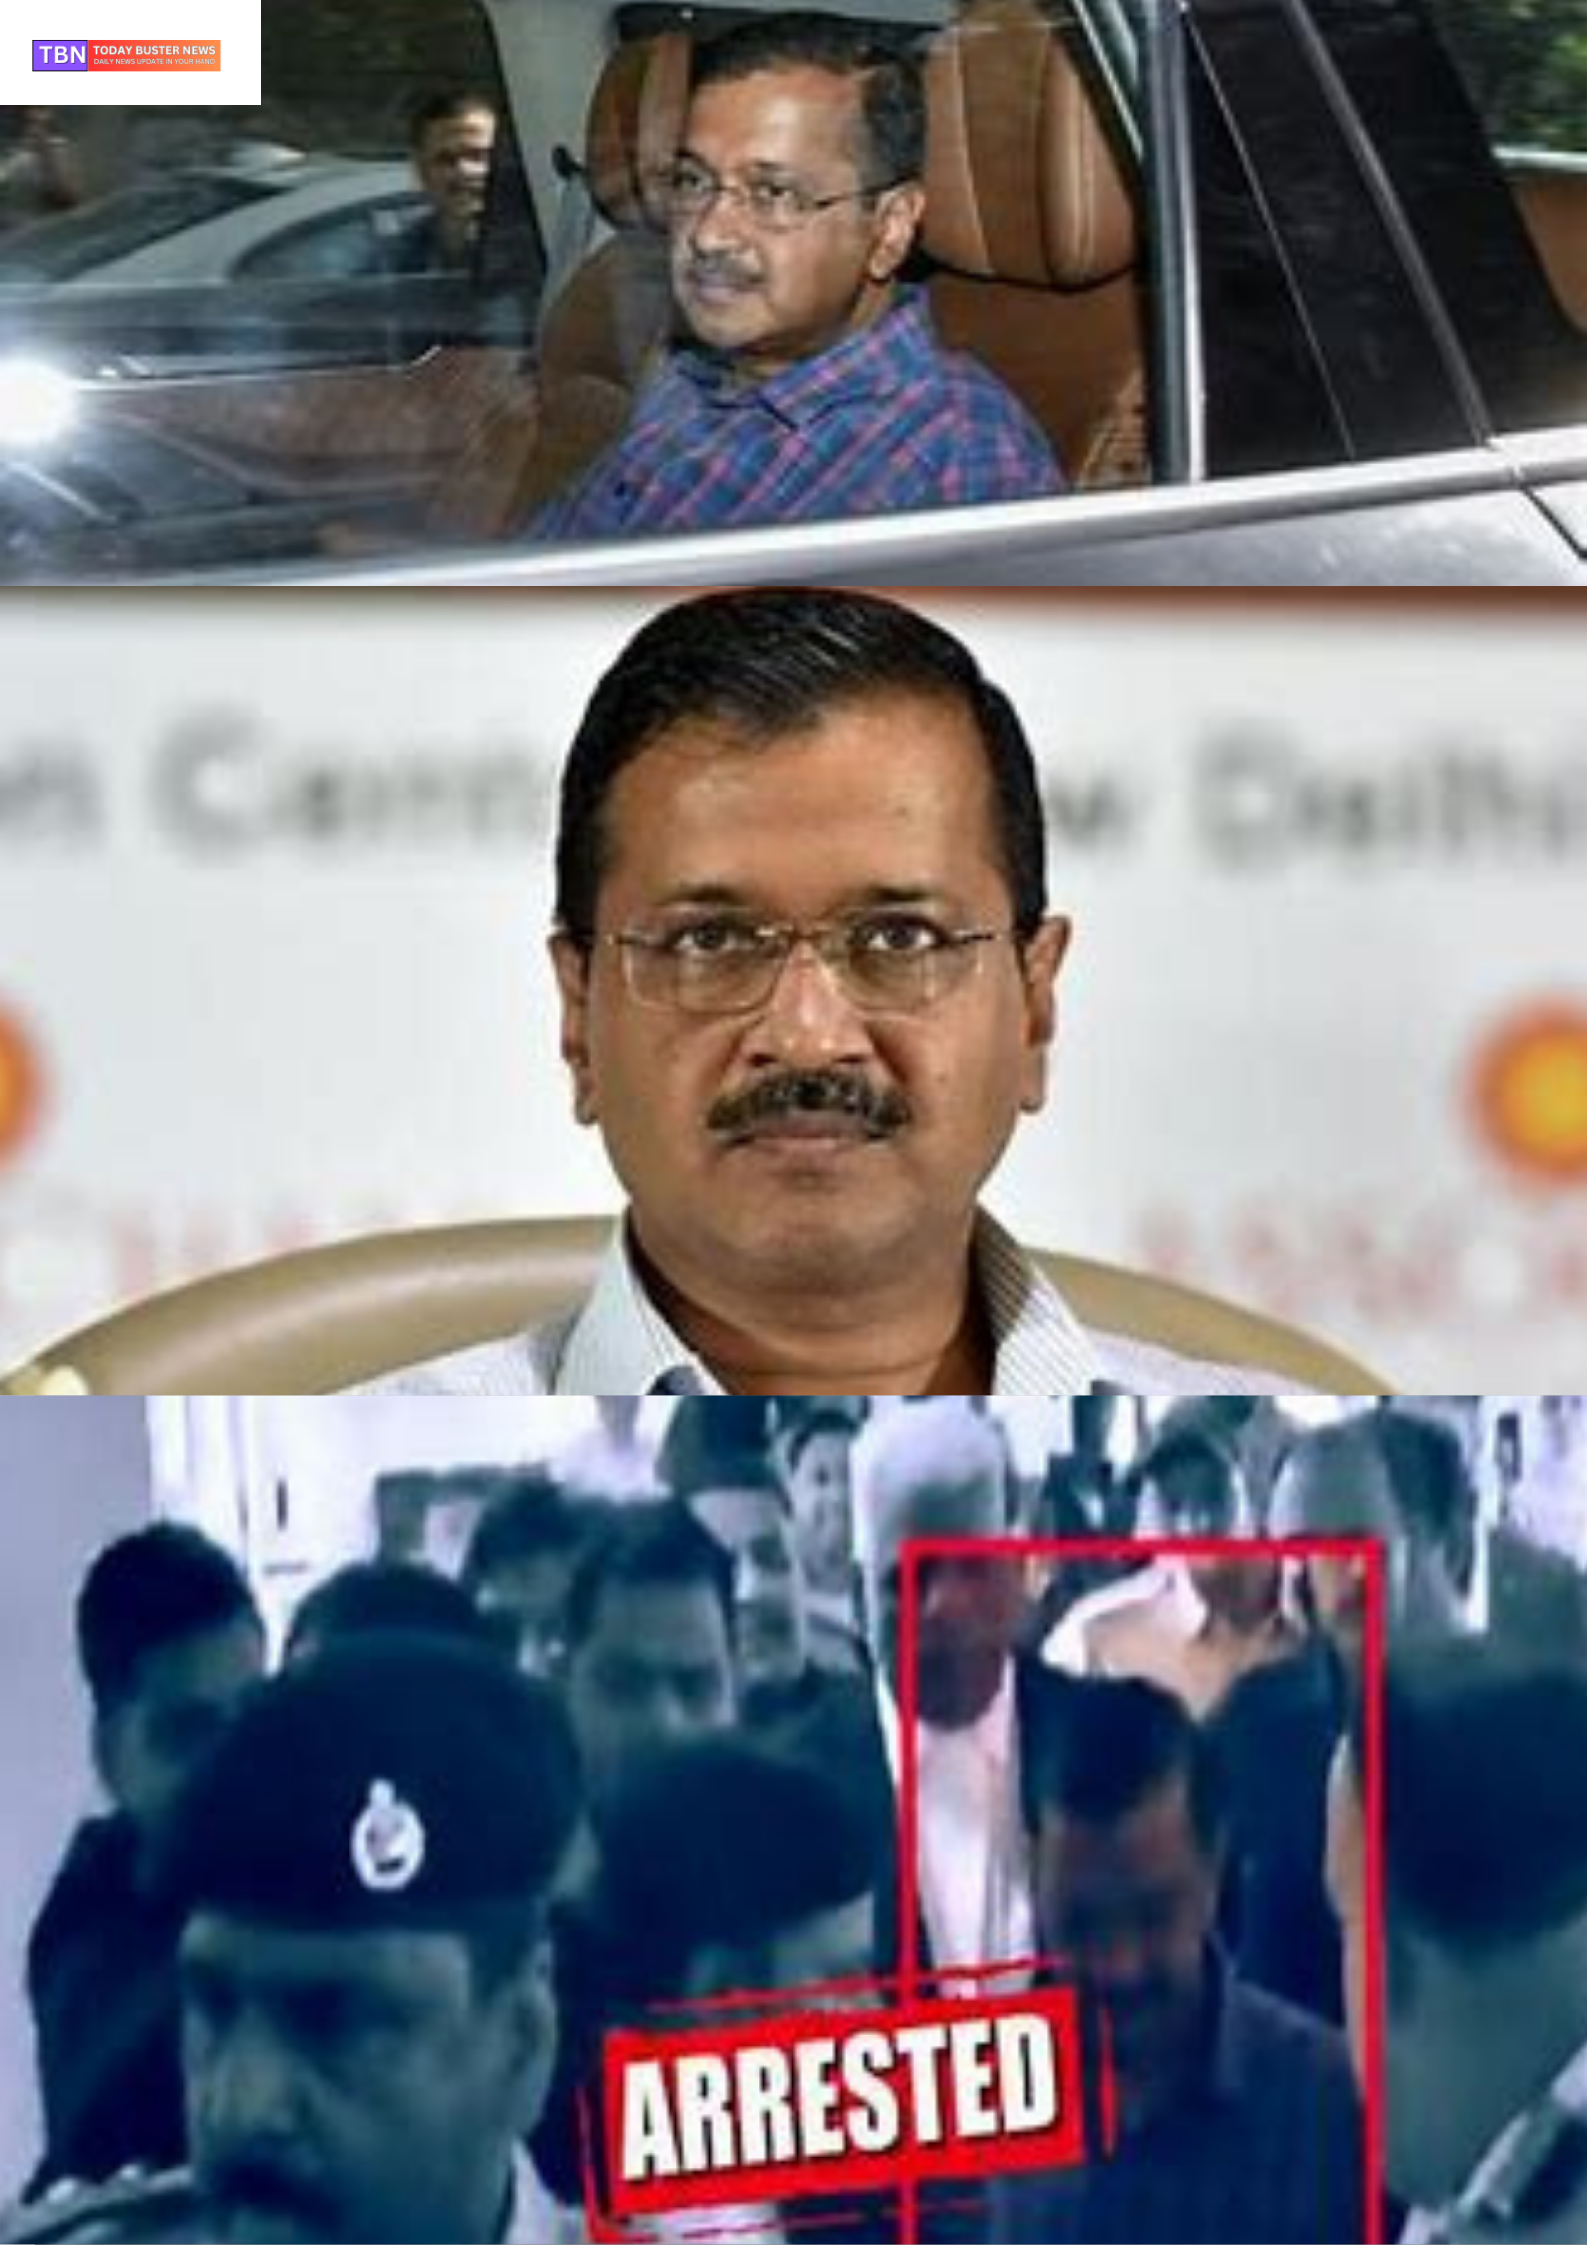 Delhi Chief minister Arvind Kejriwal has been sent to police custody